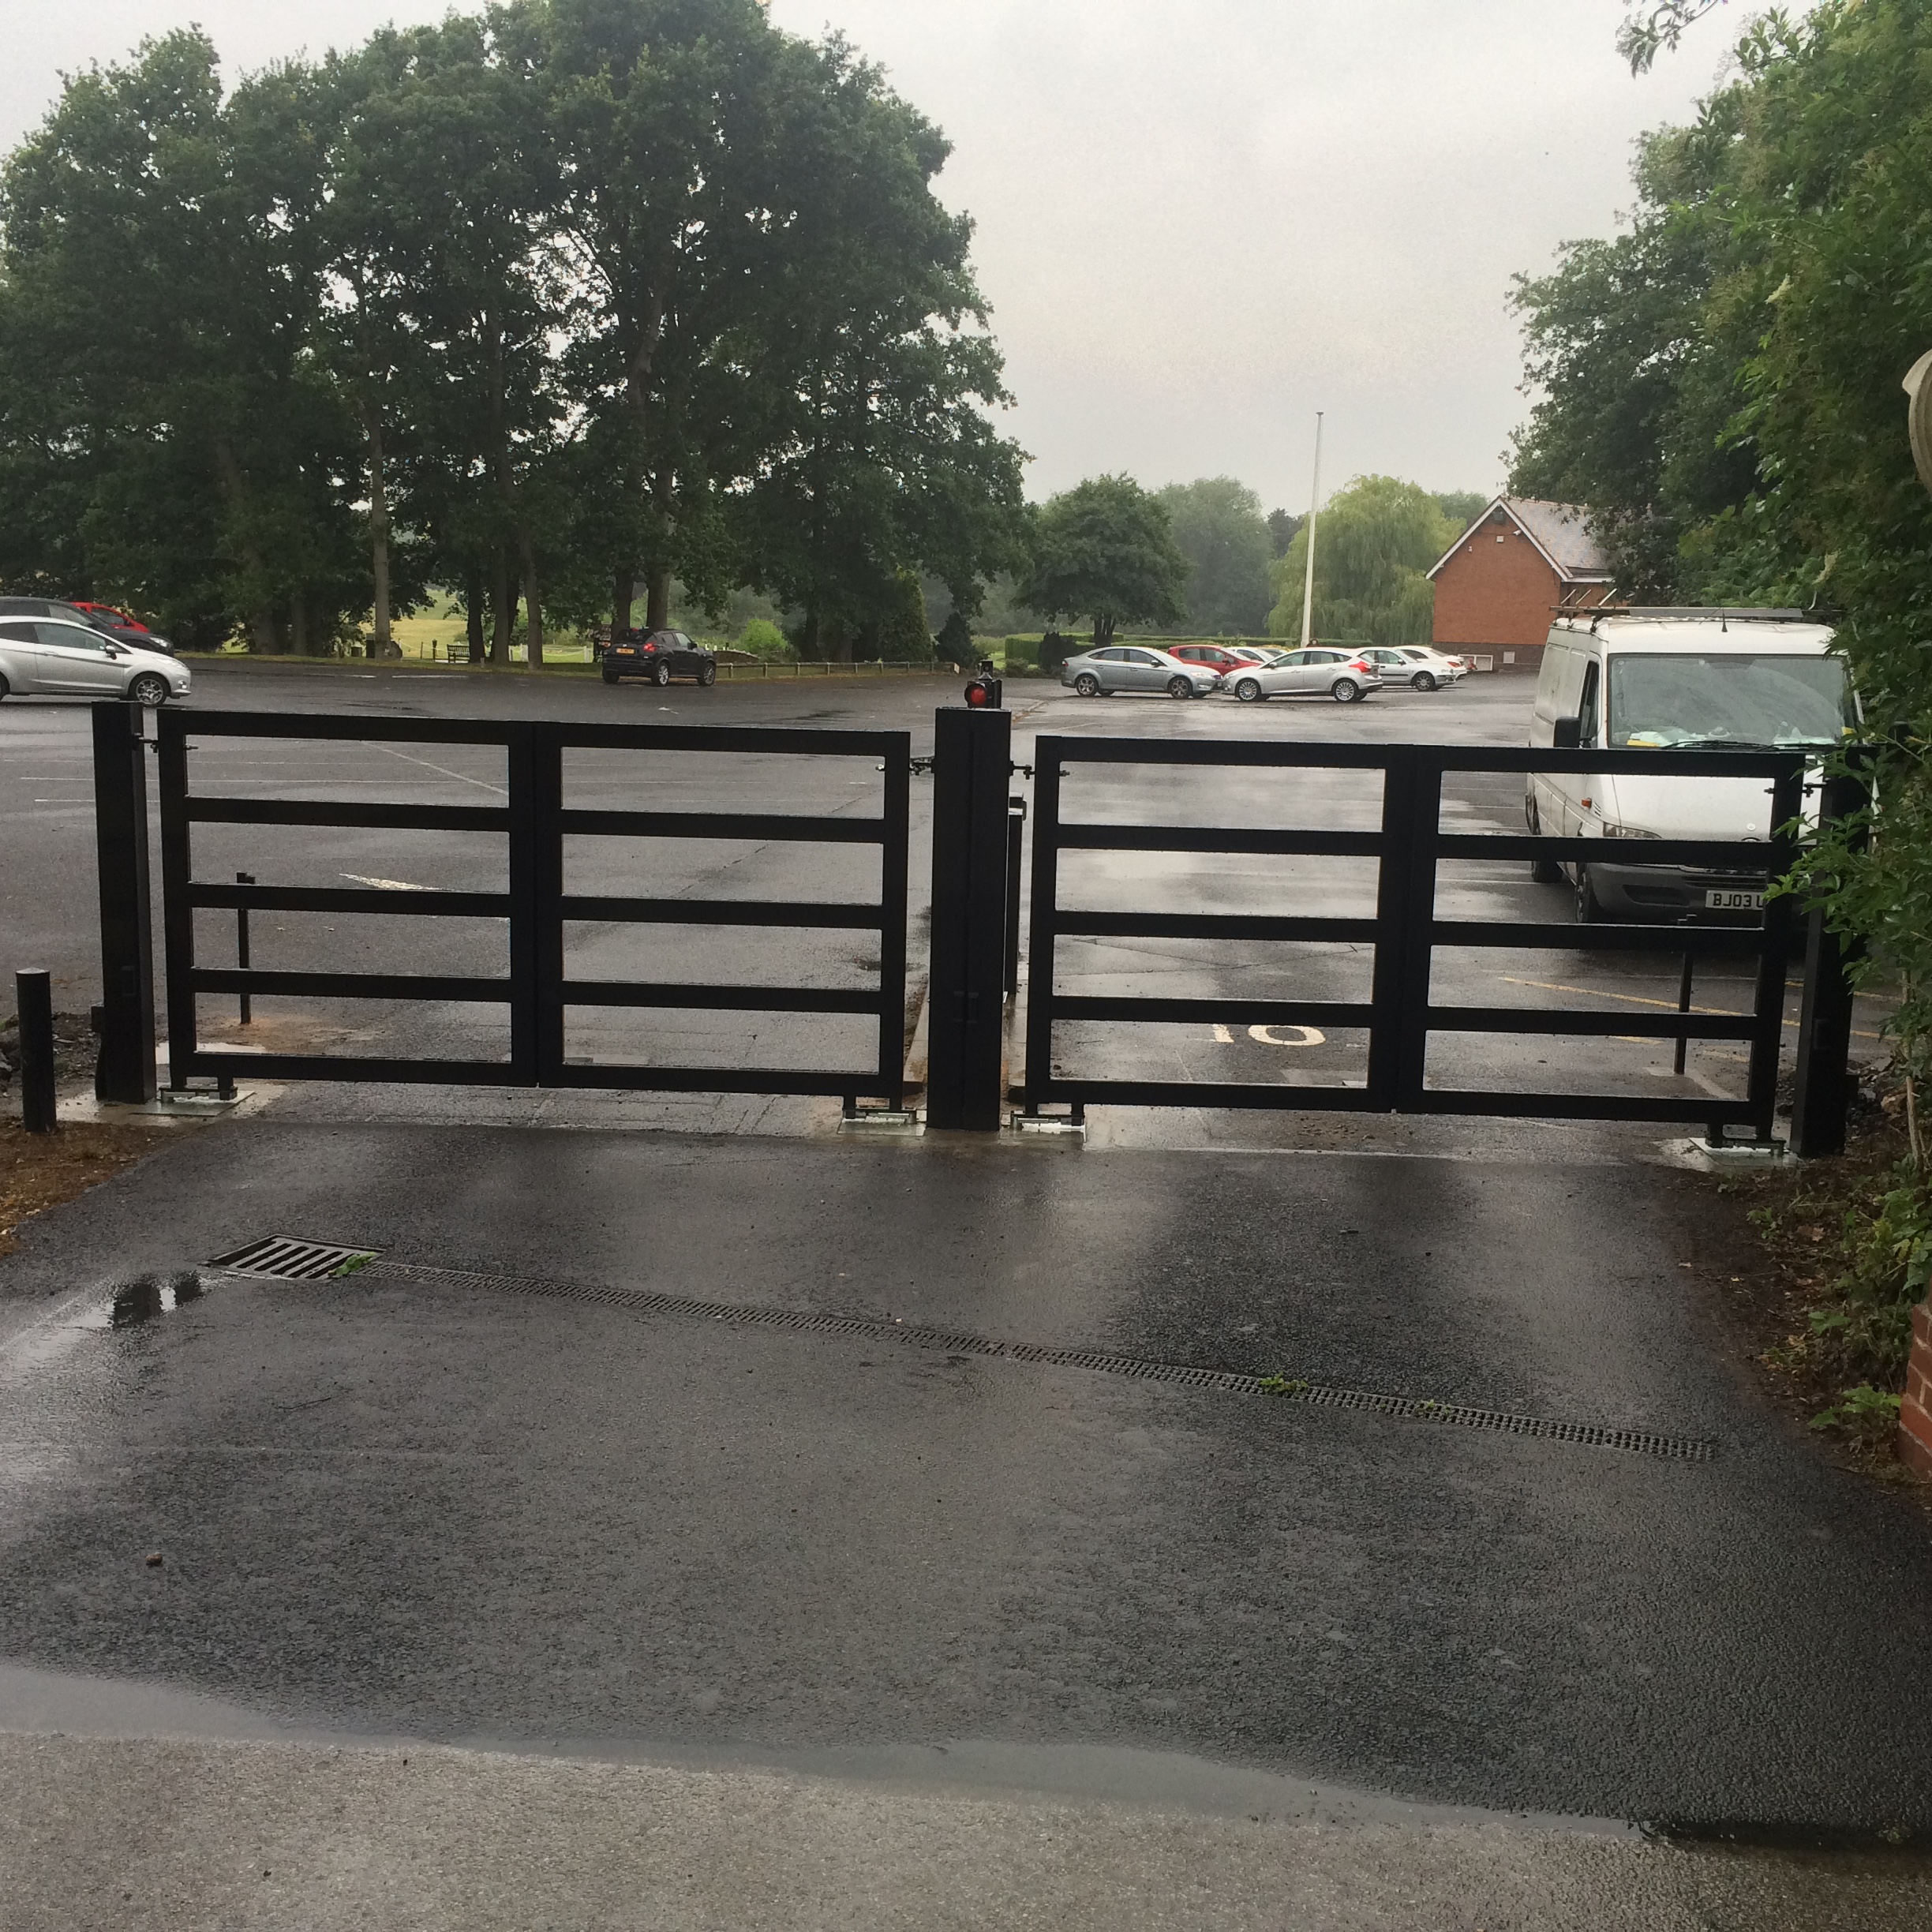 FIVE BAR STEEL IN OUT GATES AT GOLF CLUB